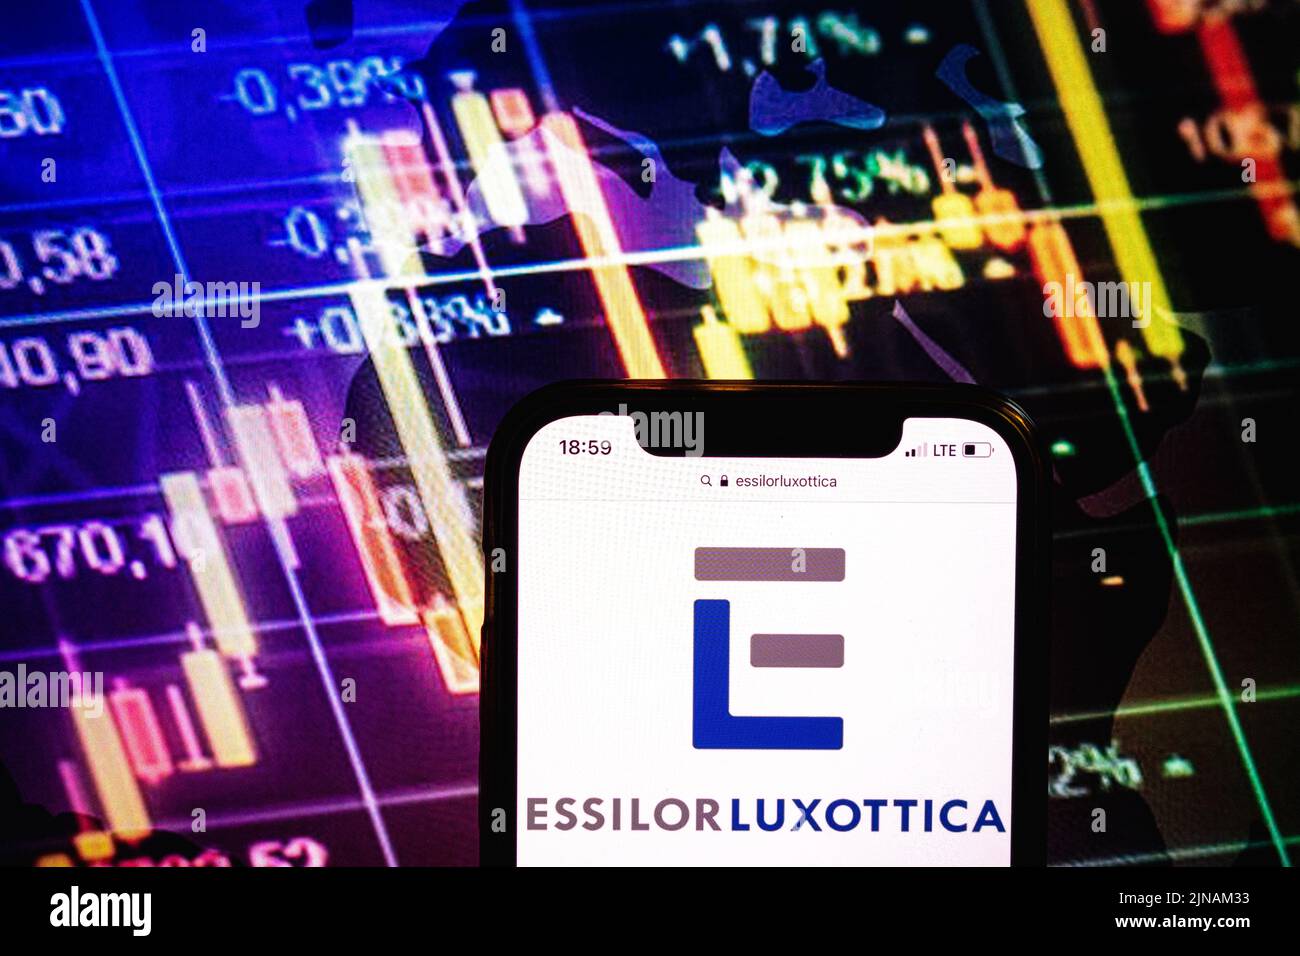 KONSKIE, POLAND - August 09, 2022: Smartphone displaying logo of EssilorLuxottica company on stock exchange diagram background Stock Photo